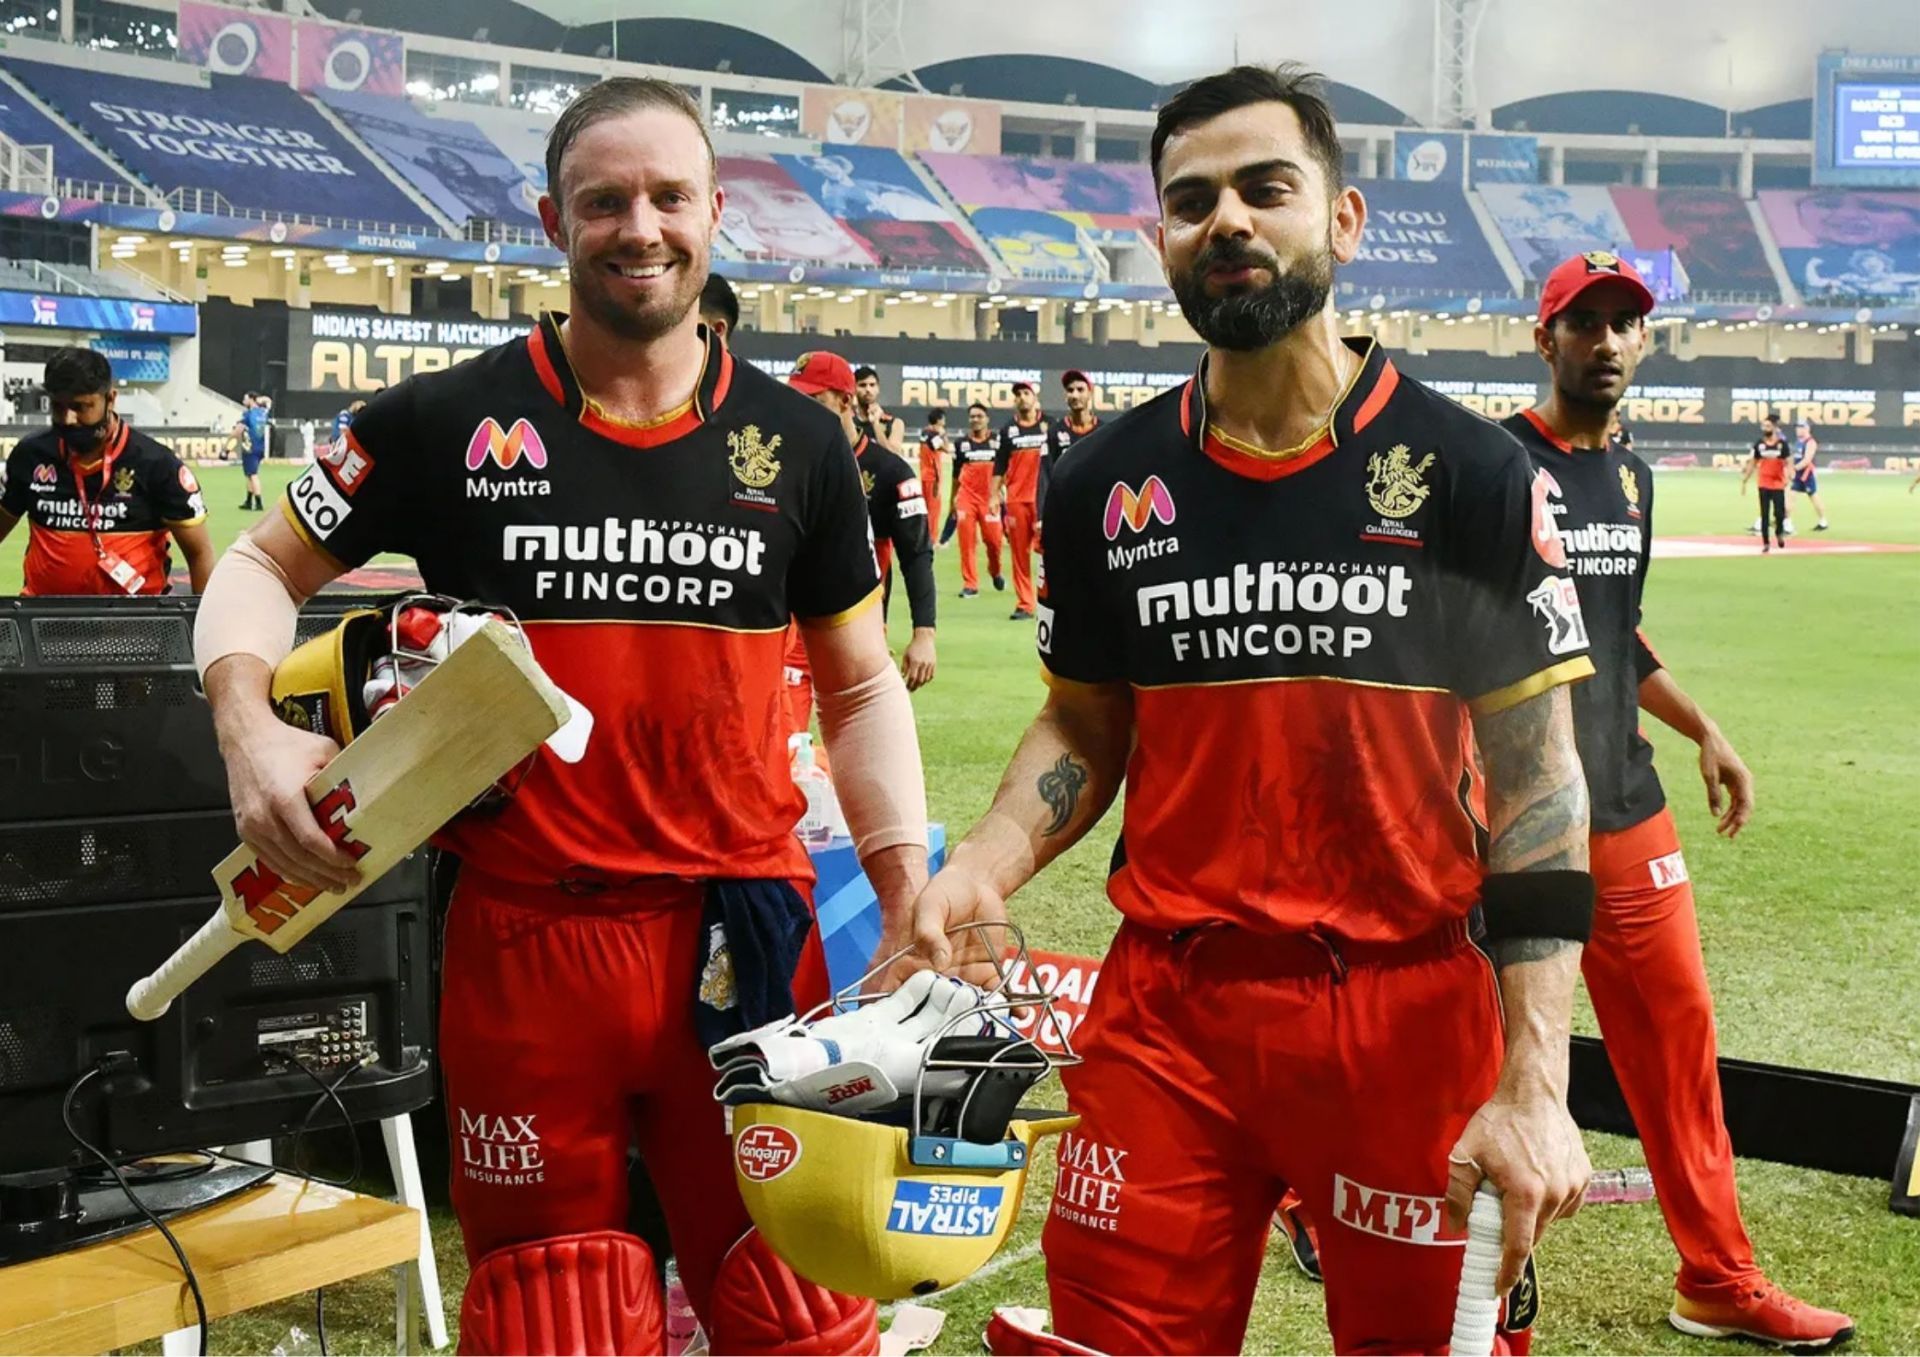 AB de Villiers and Virat Kohli have shared many memorable partnerships over the years in the IPL (Picture Credits: IPL)